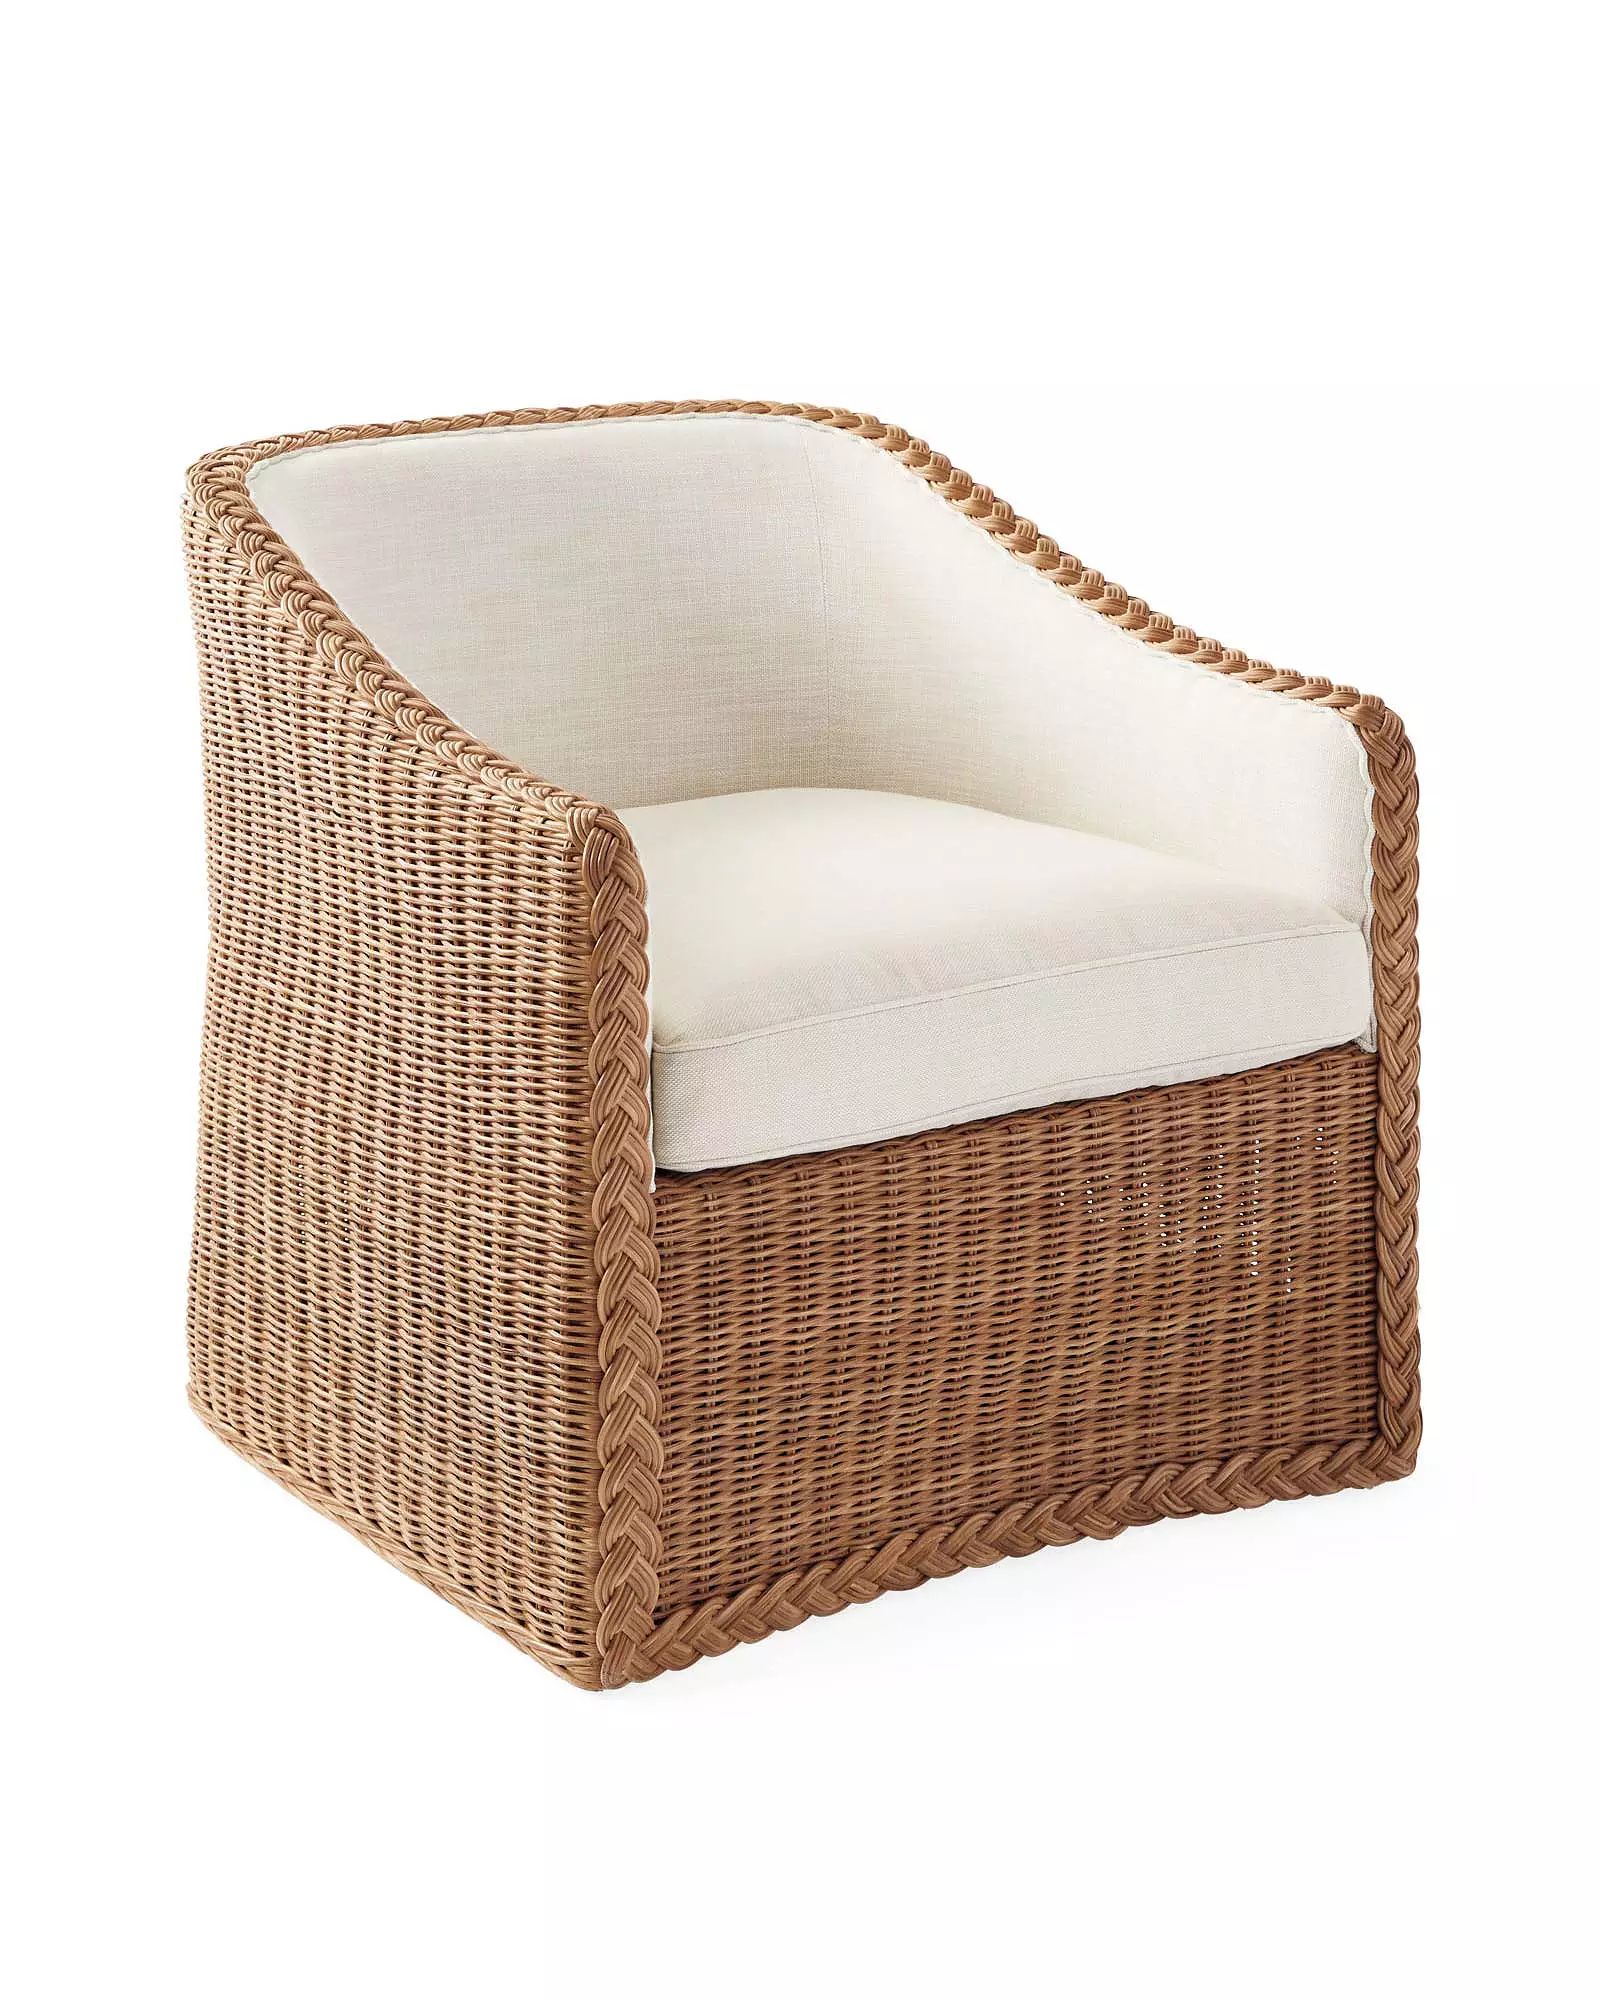 Yarmouth Swivel Chair | Serena and Lily